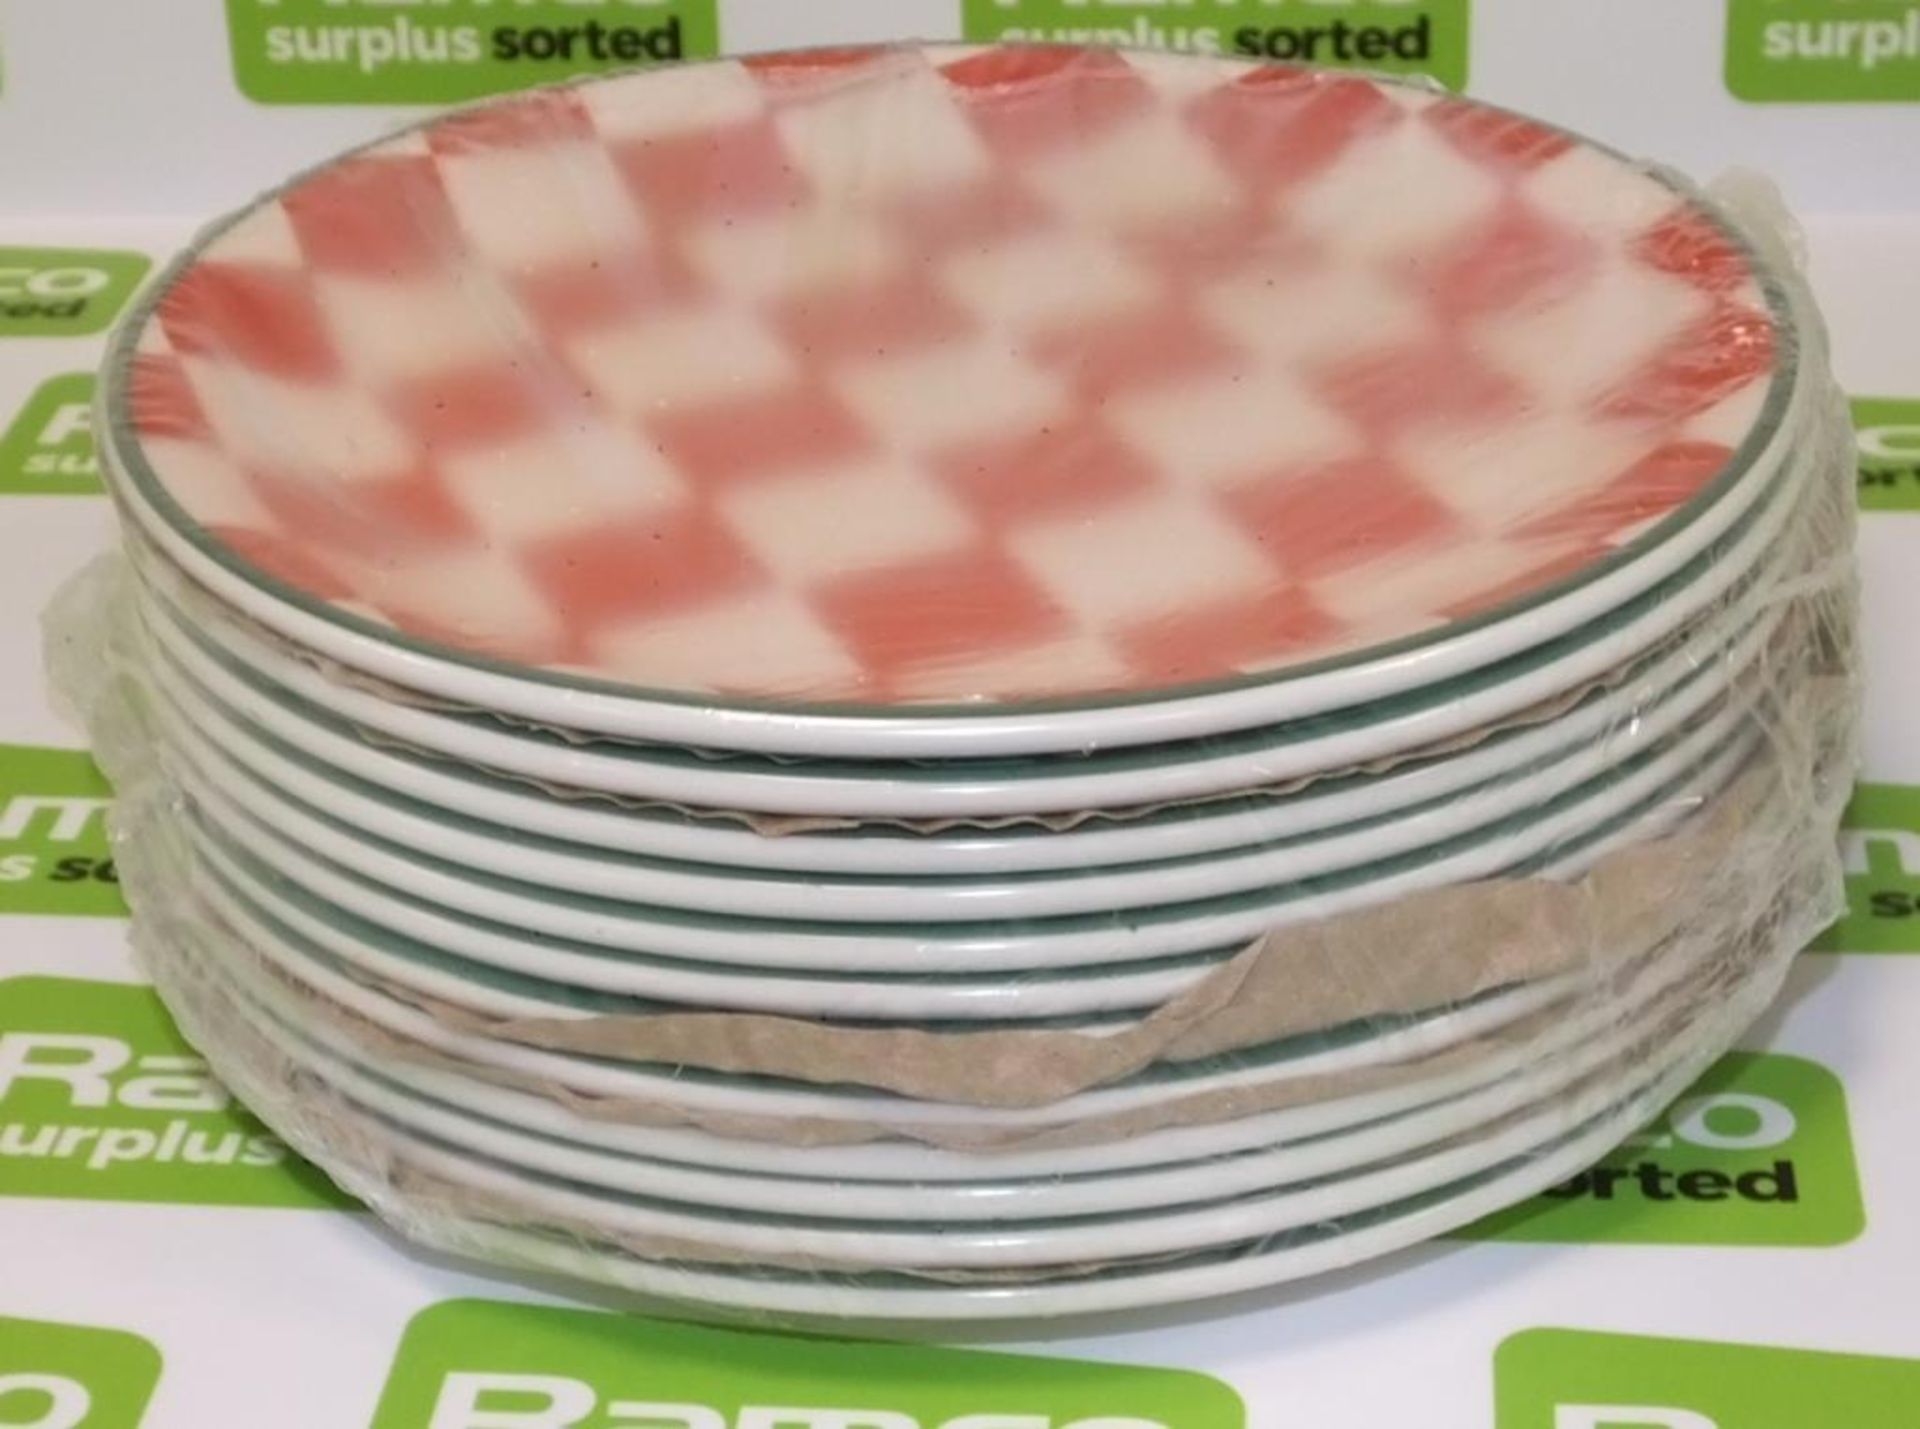 Steelite table setting plates - Red Check/Green Rim Plate Coupe 20.25cm / 8 in - 12 per box 5 boxes - Image 2 of 5